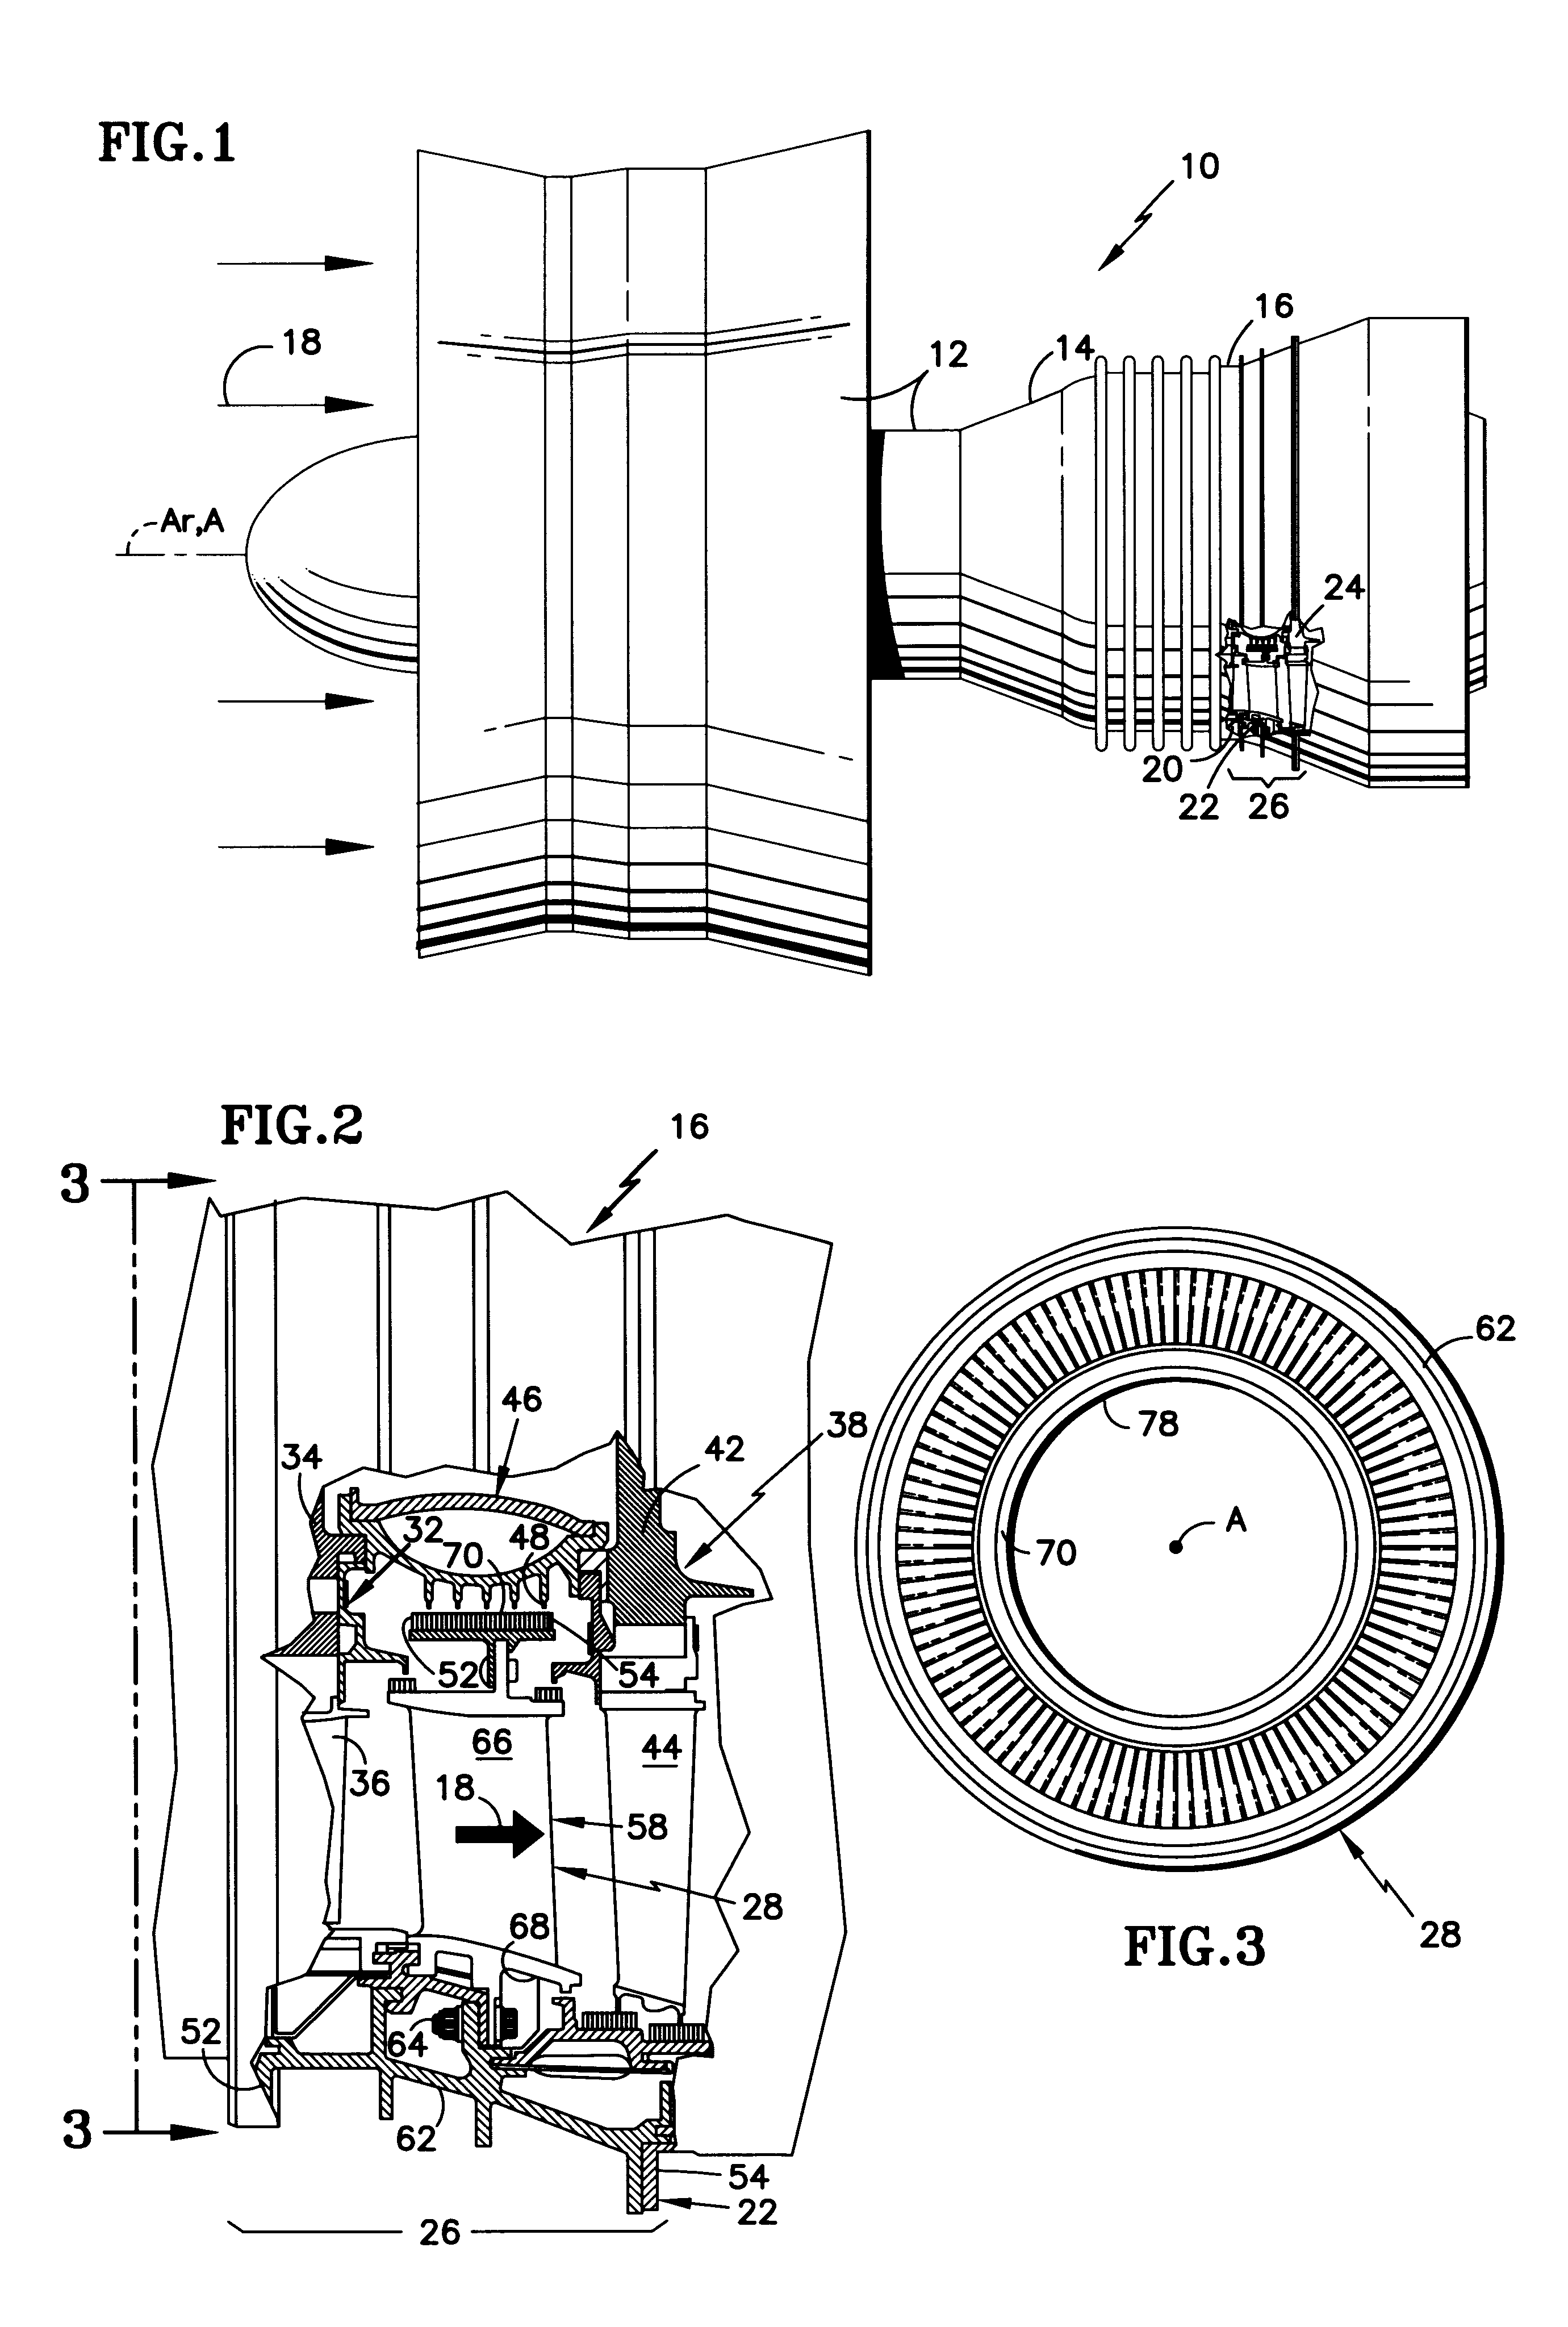 Method of forming a stator assembly for rotary machine